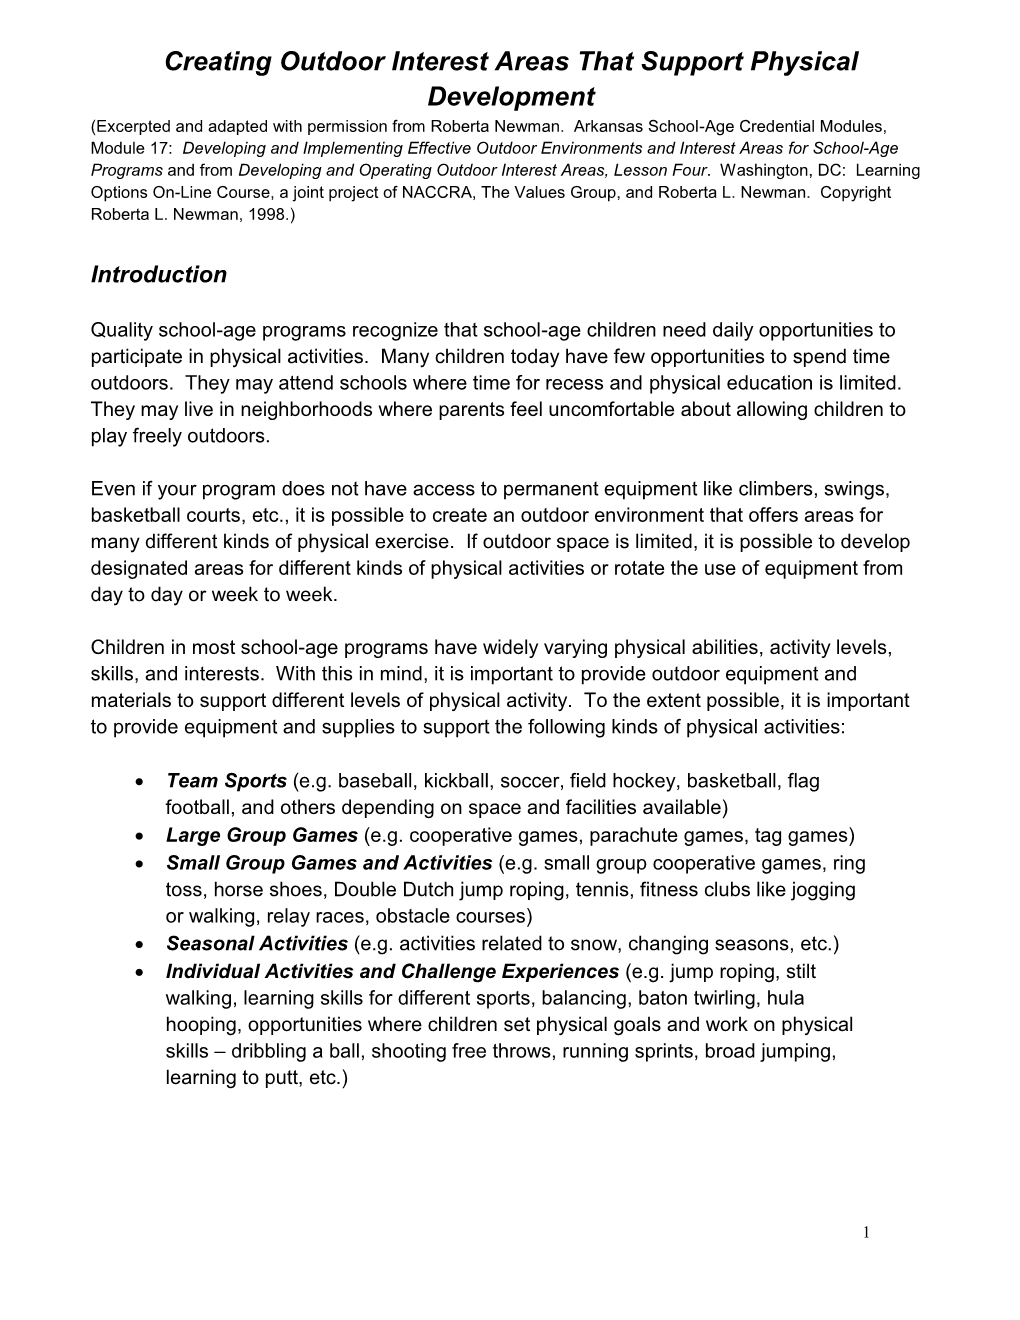 Creating Outdoor Interest Areas That Support Physical Development (Excerpted and Adapted with Permission from Roberta Newman